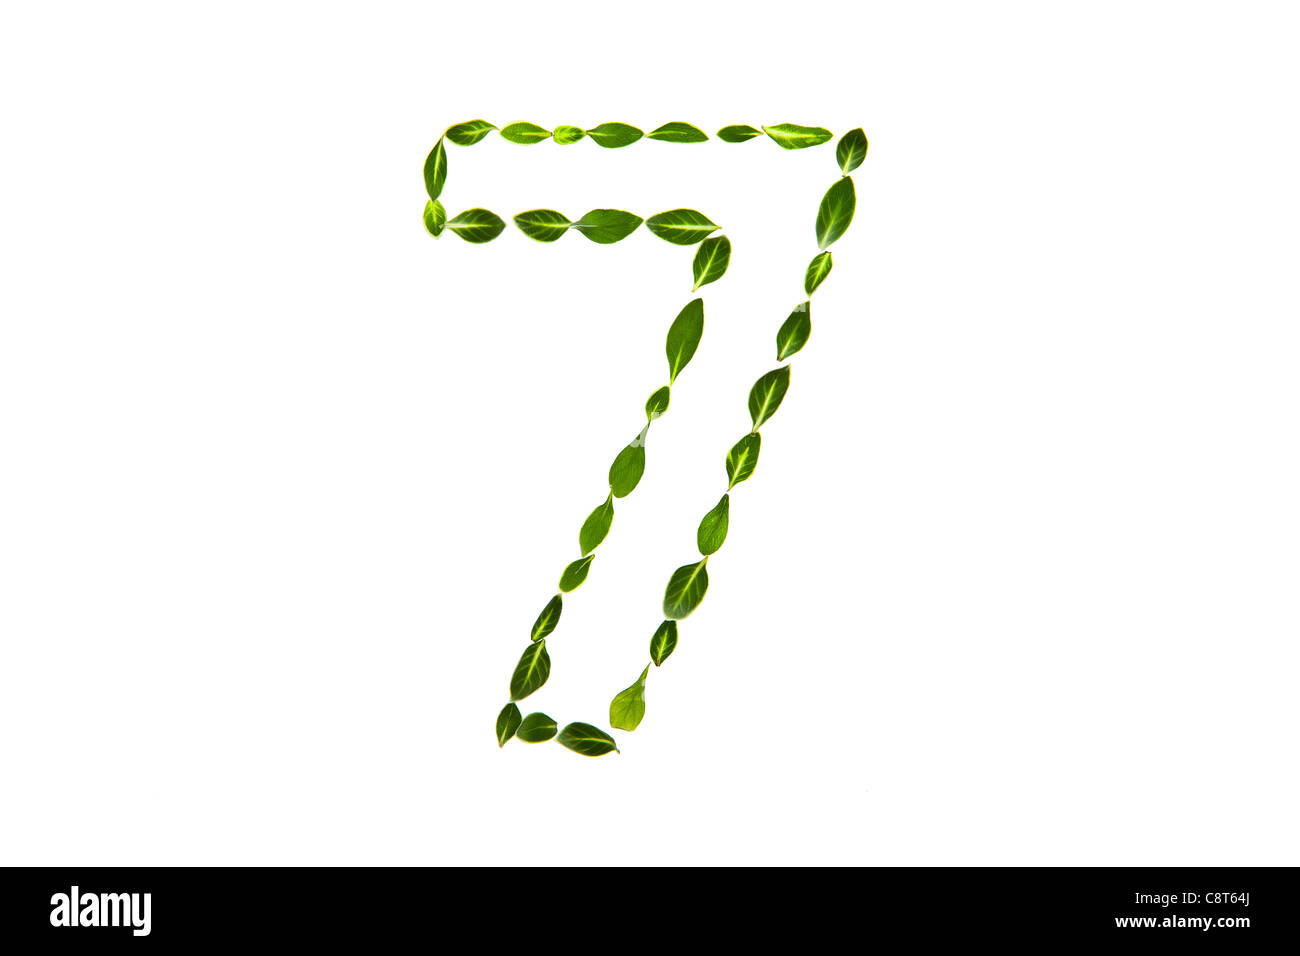 Number 7 Drawn With Leafs Stock Photo